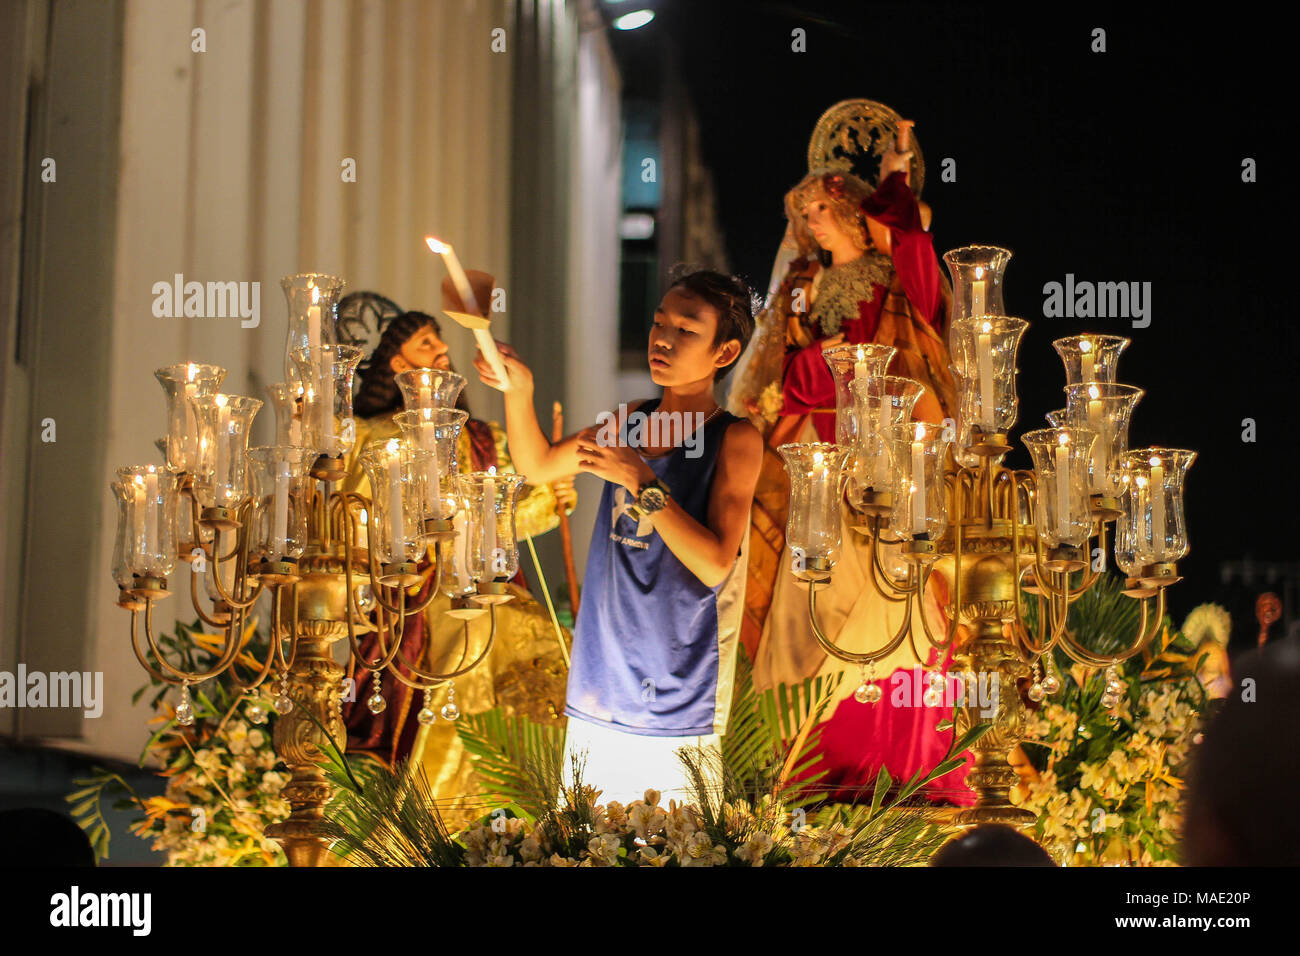 March 29, 2018 - Manila, NCR, Philippines - A young boy giving light to the candles of their float during the parade..Every year of in March, Christians all over the world commemorate the suffering and death of Jesus Christ on the cross. In the Philippines, Holy Week or â€œSemana Santaâ€ has been celebrated by having different rituals and practices such as â€œVisita Iglesiaâ€ or visiting several churches, â€œPenetensyaâ€ or Penitence of re enacting the hardship of Jesus Christ, â€œPabasaâ€ or graphical reading of the word of God and â€œParadaâ€ or parade of the saints, disciple and journe Stock Photo